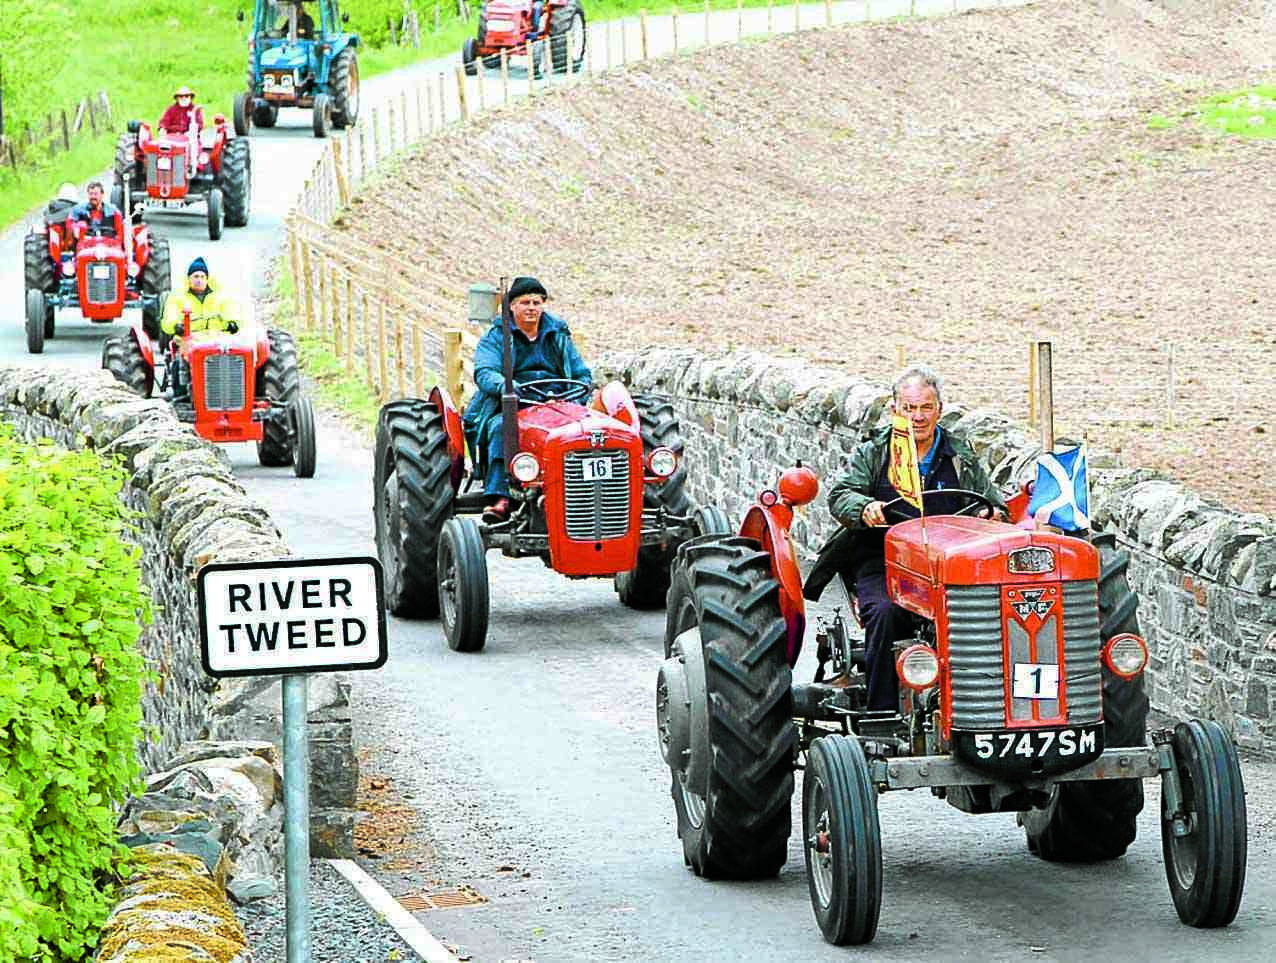 Cavalcade of tractors take to hills